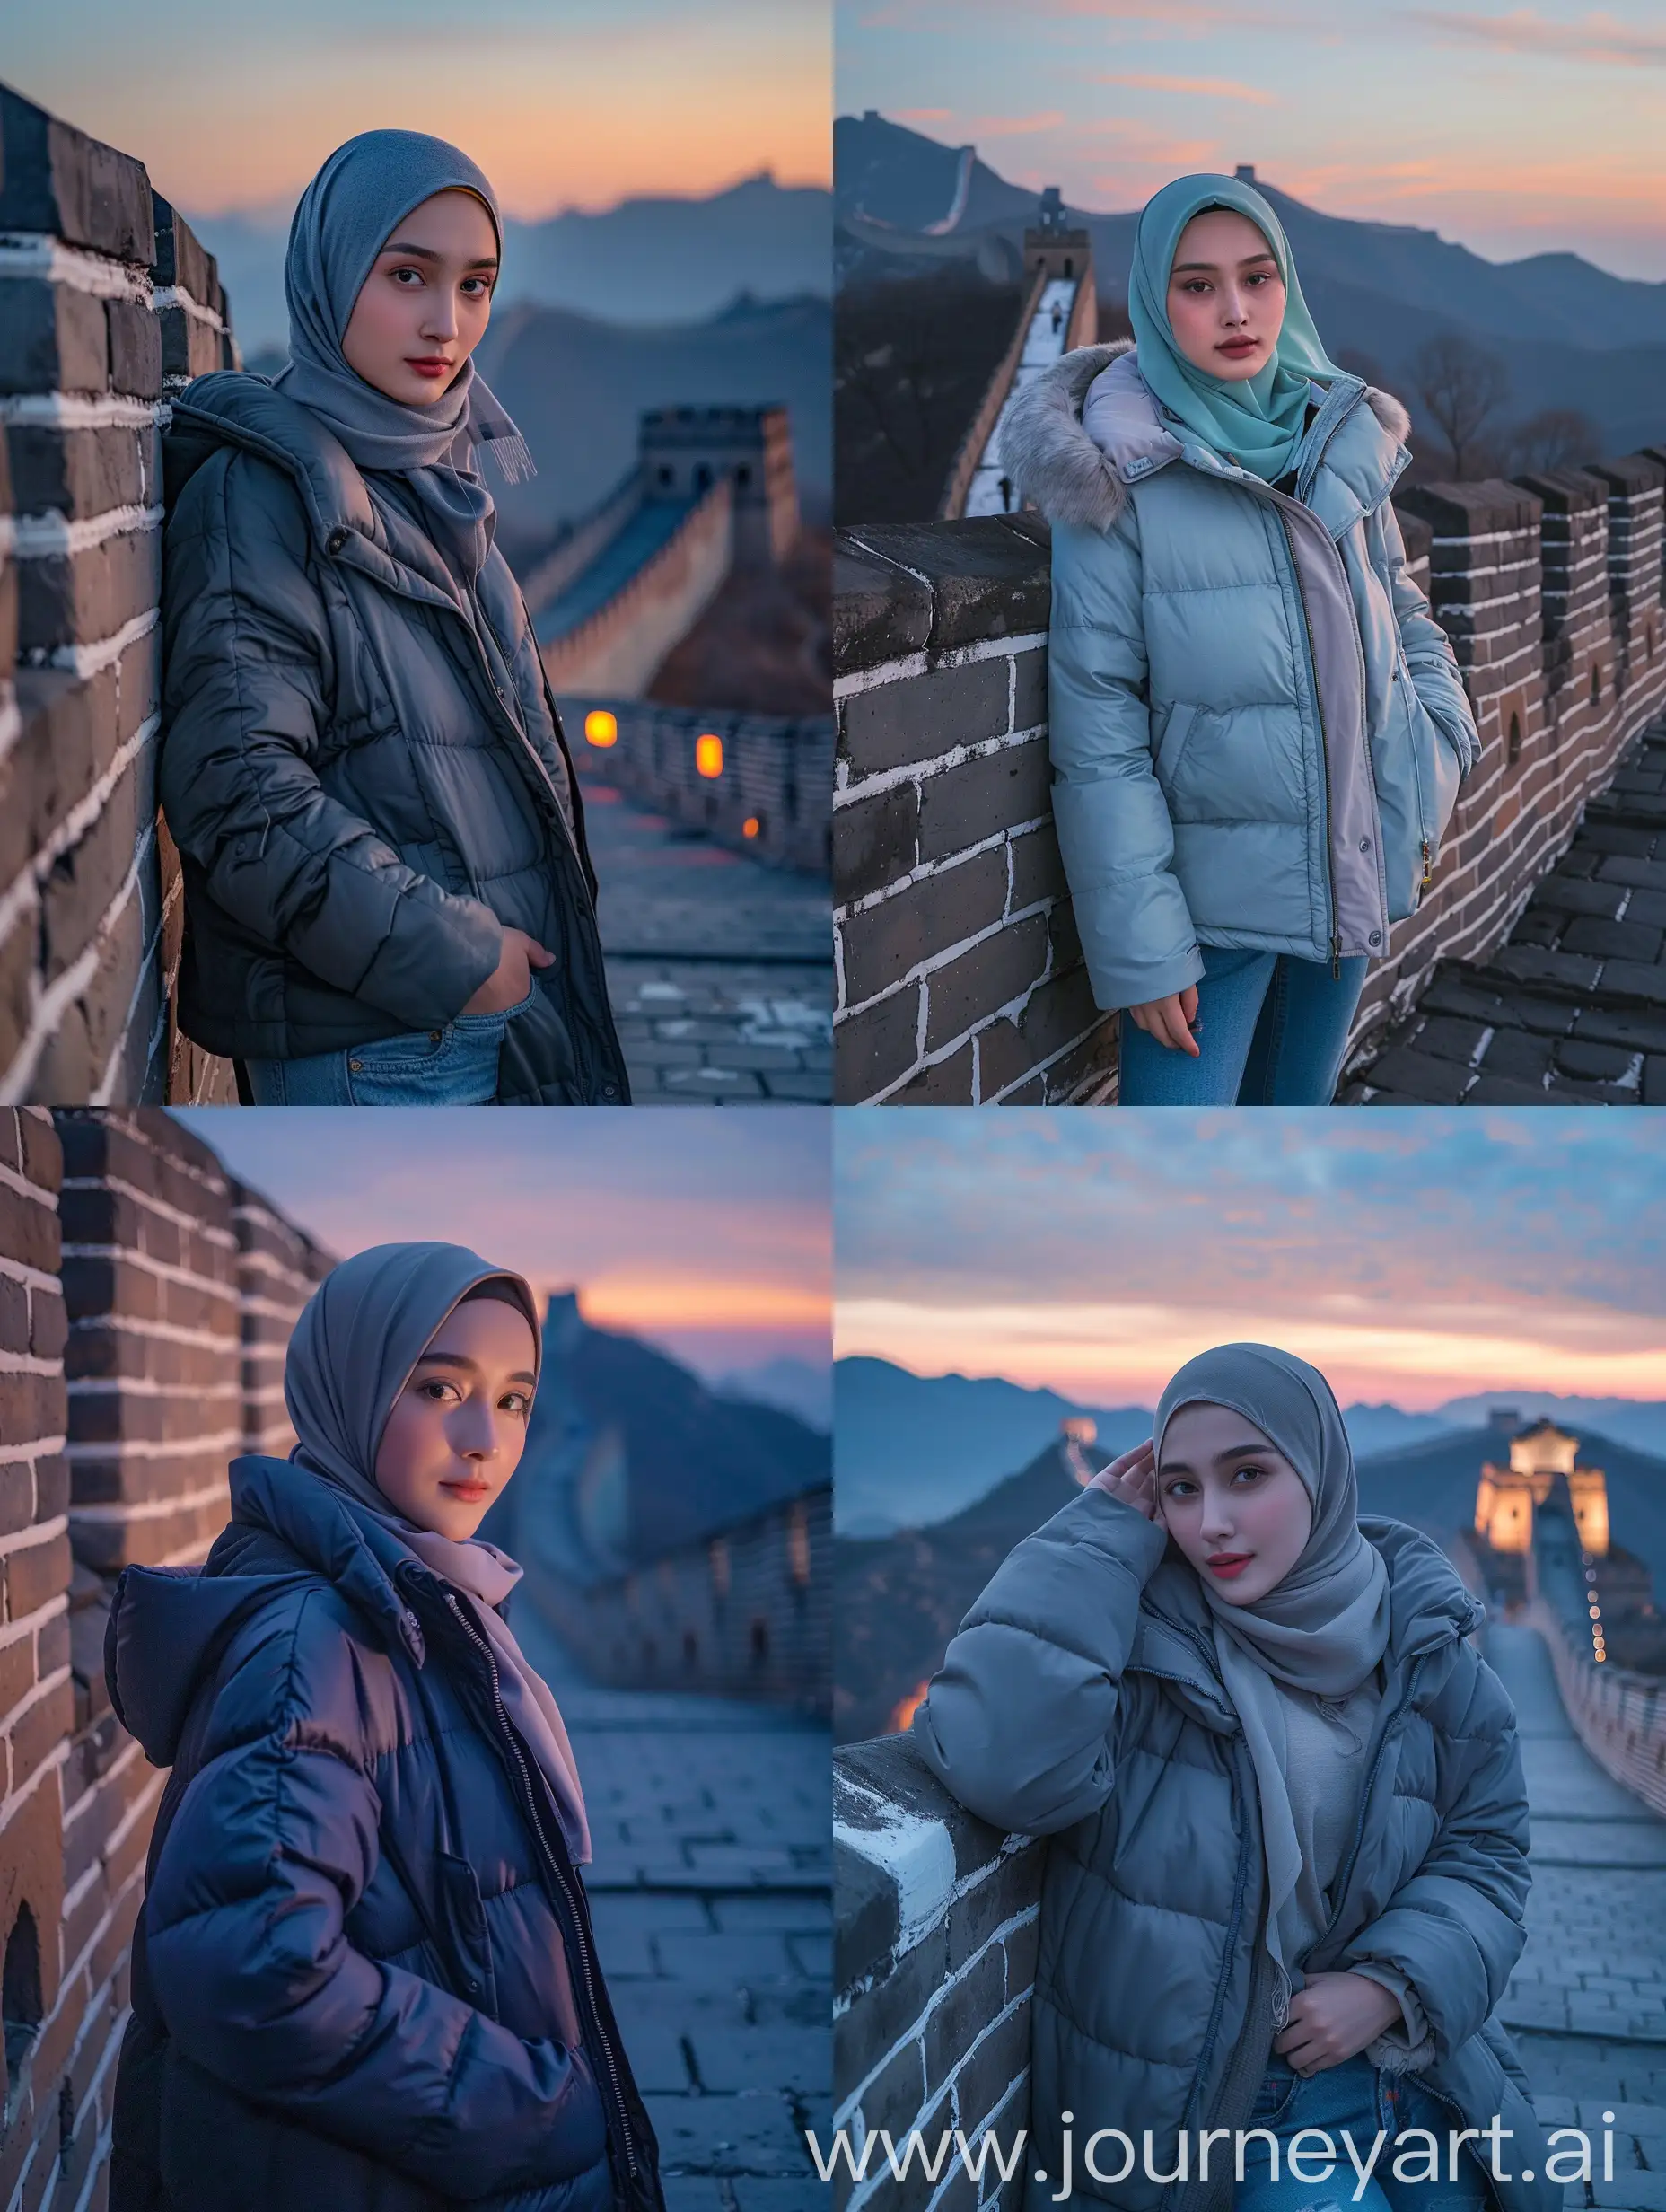 Javanese-Woman-in-Winter-Jacket-Poses-on-Great-Wall-at-Sunset